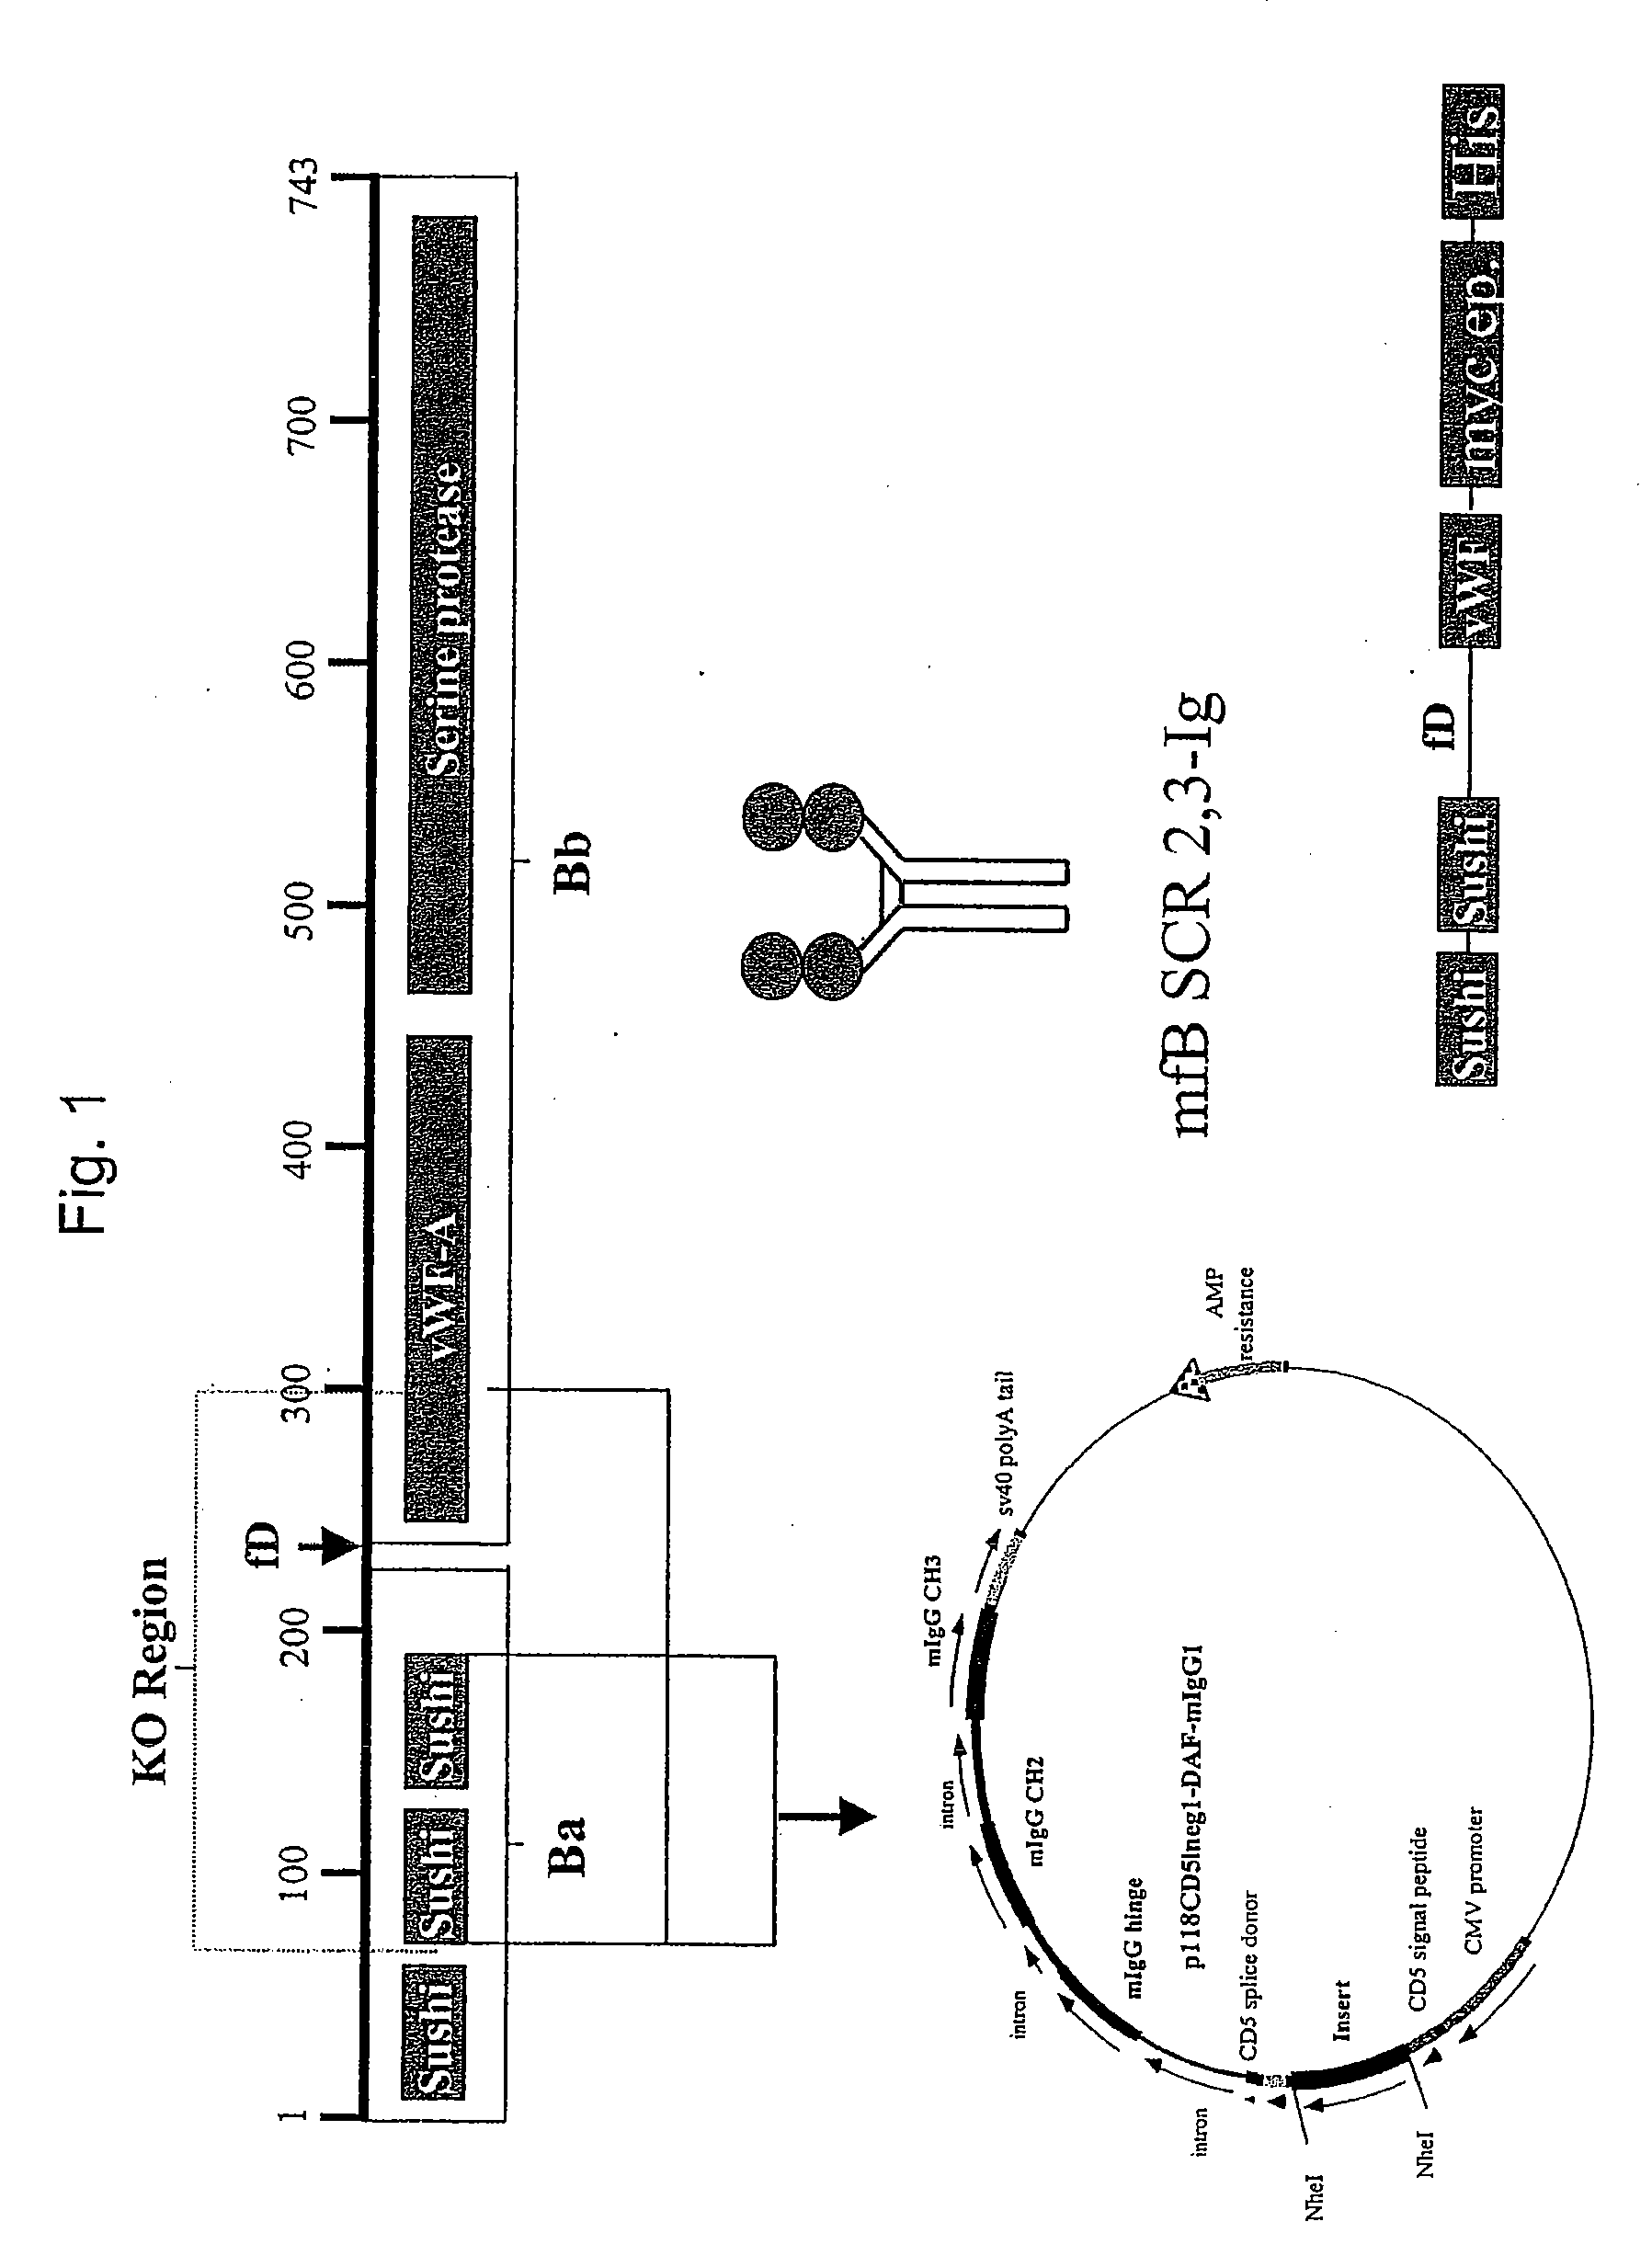 Inhibition of factor b, the alternative complement pathway and methods related thereto